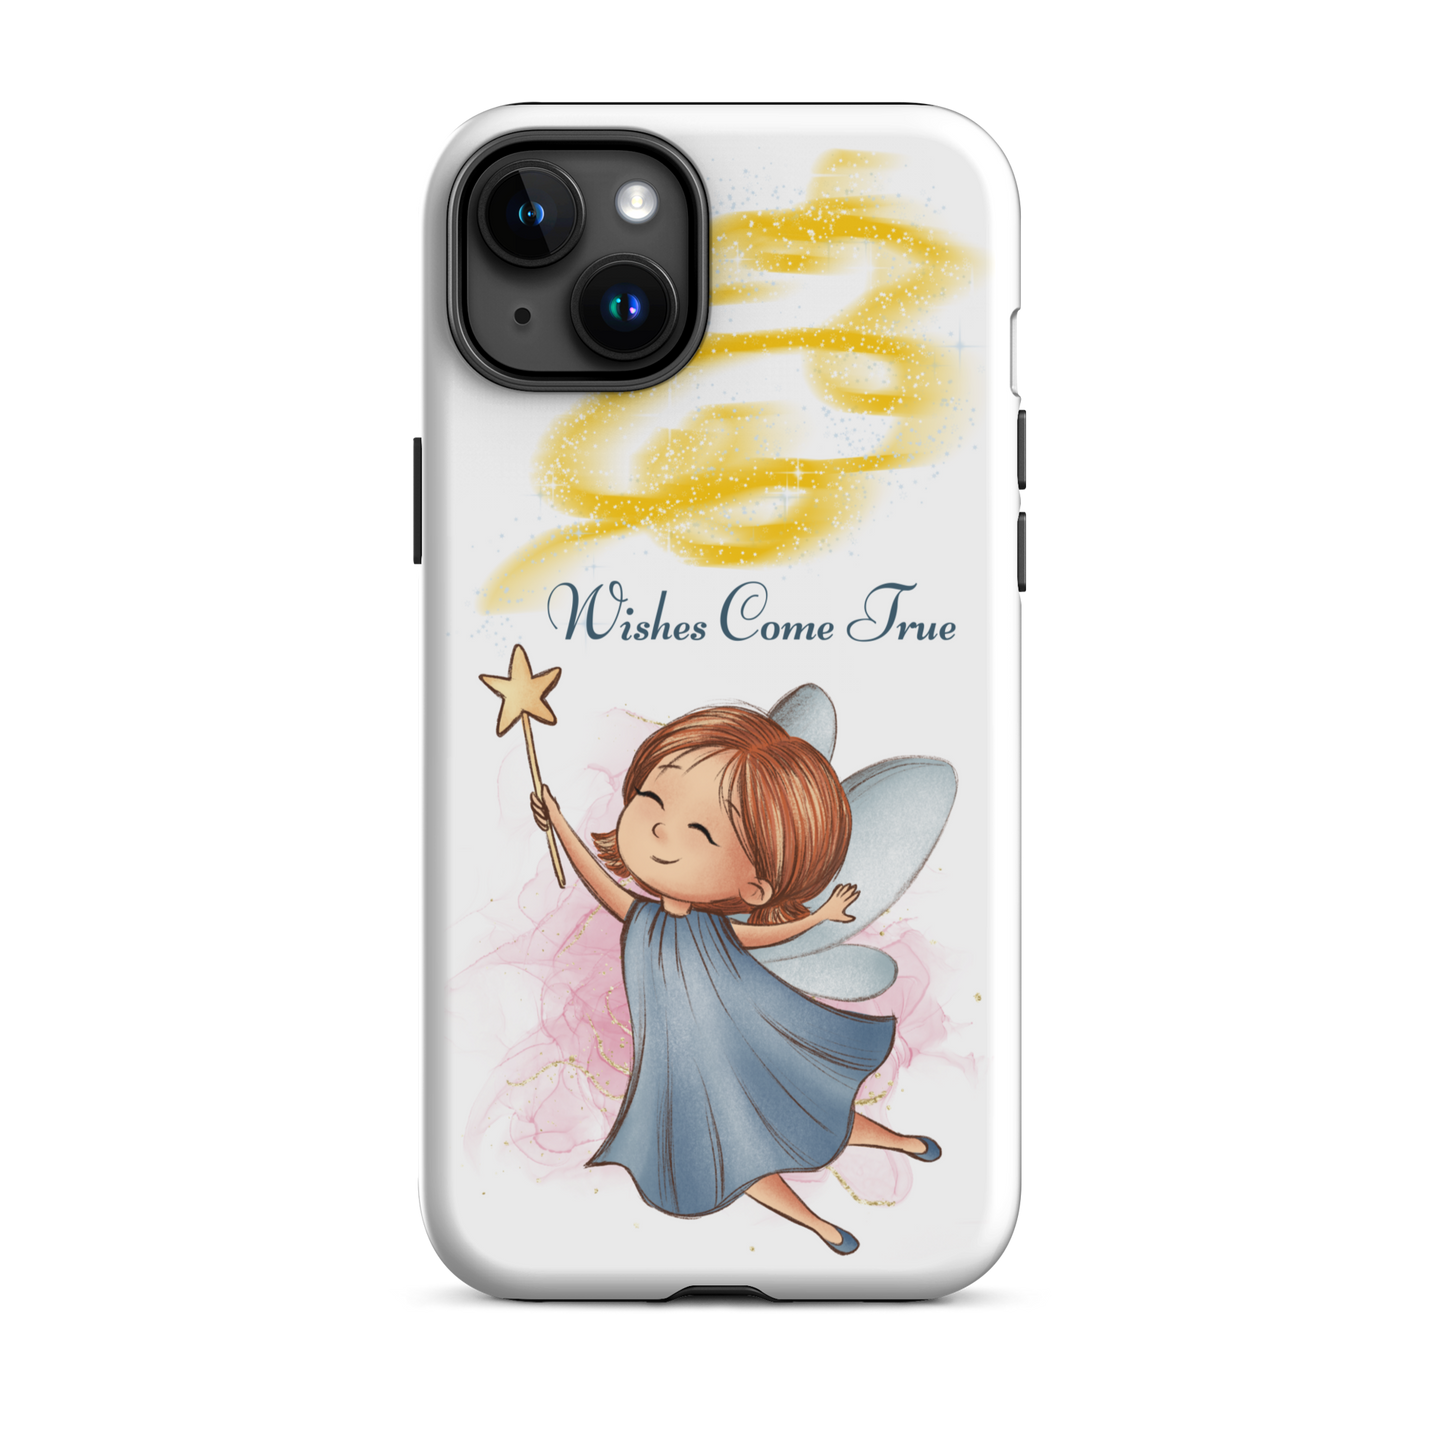 Tough case for iPhone 11, 12, 13, 14, 15 Variations | Wishes Come True - Blue Fairy